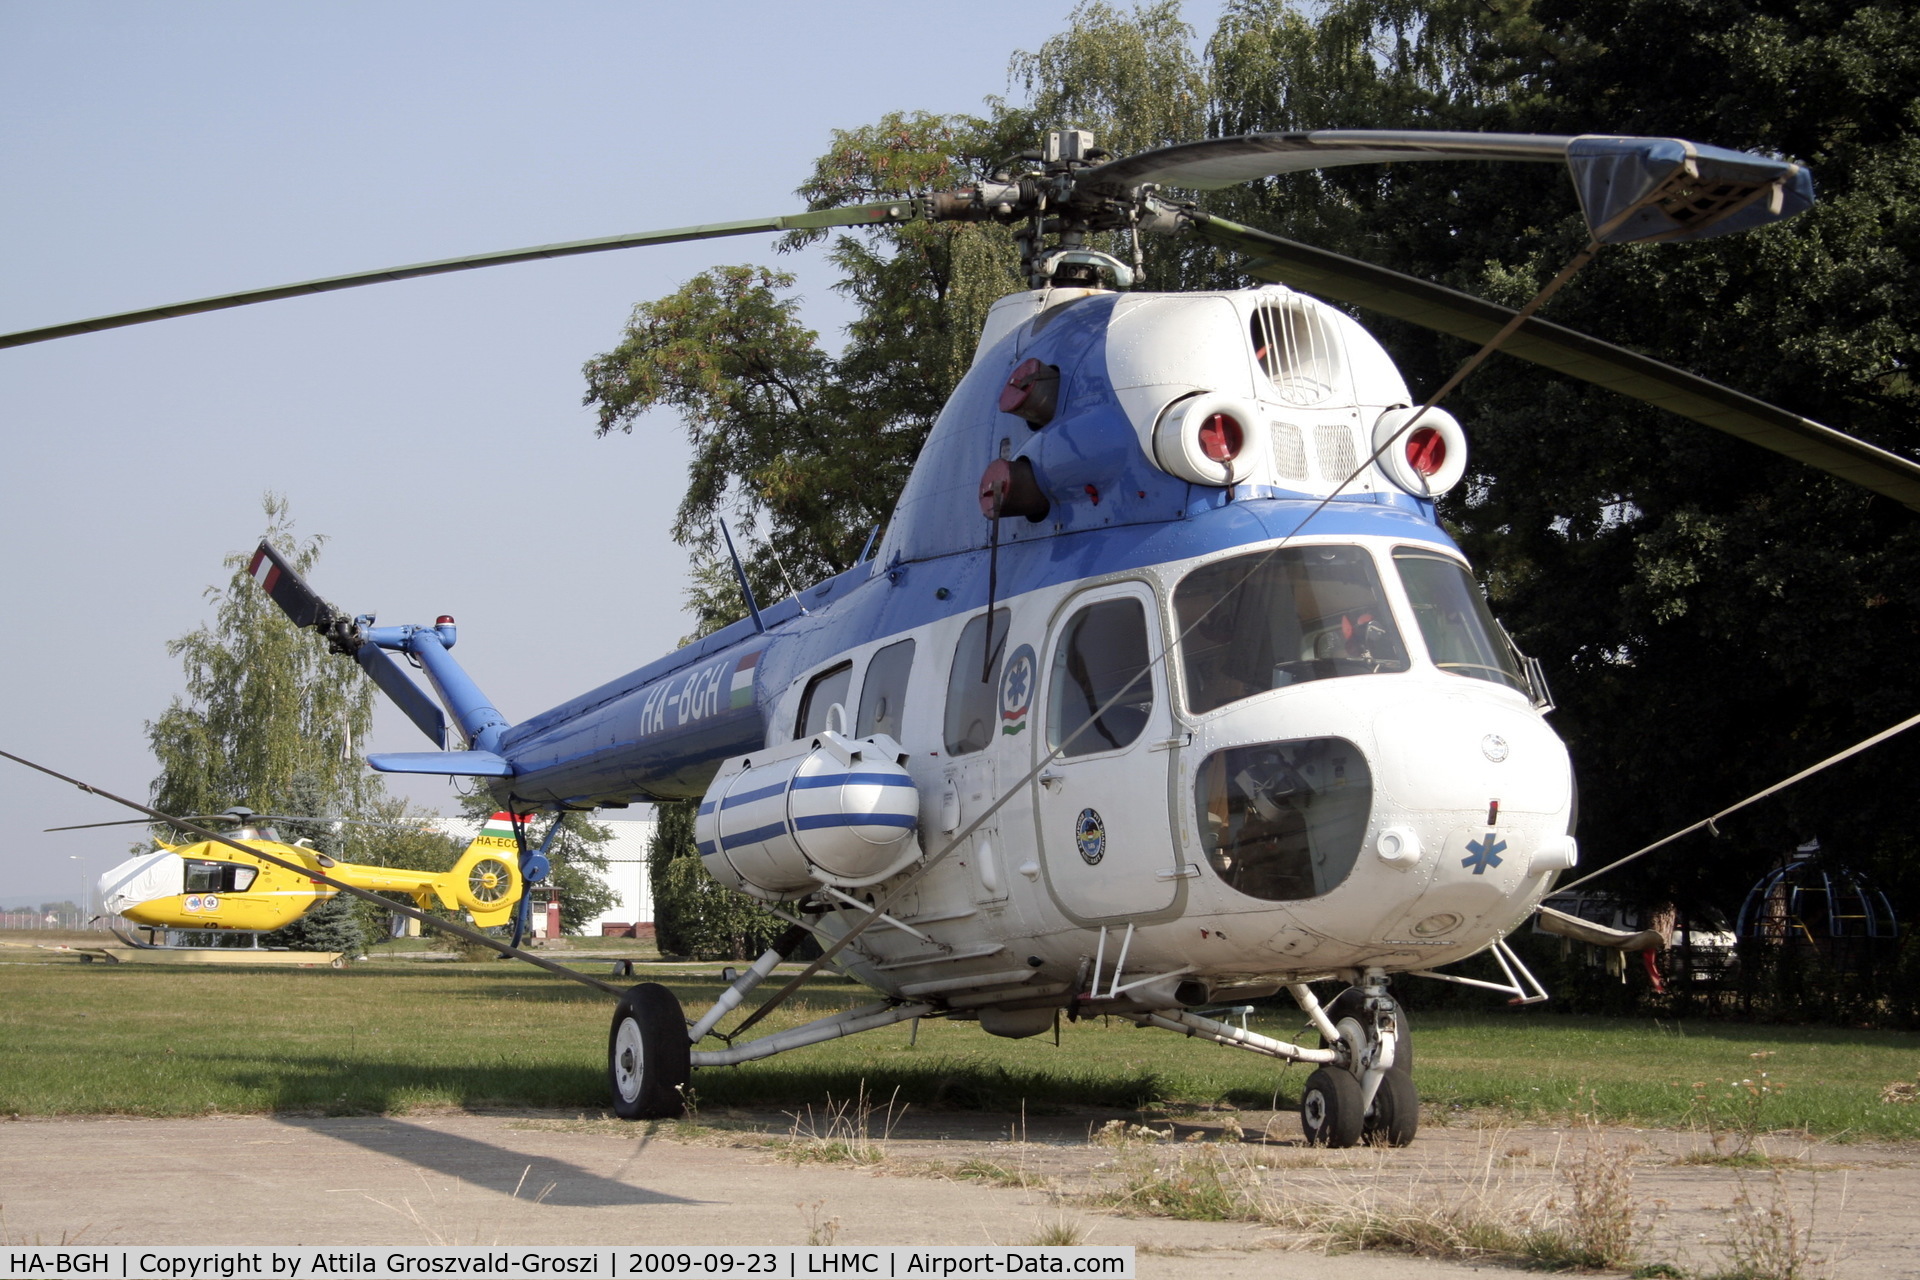 HA-BGH, 1987 Mil (PZL-Swidnik) Mi-2 C/N 518918104, Miskolc Airport - Hungary -  It is a new helicopter in background.